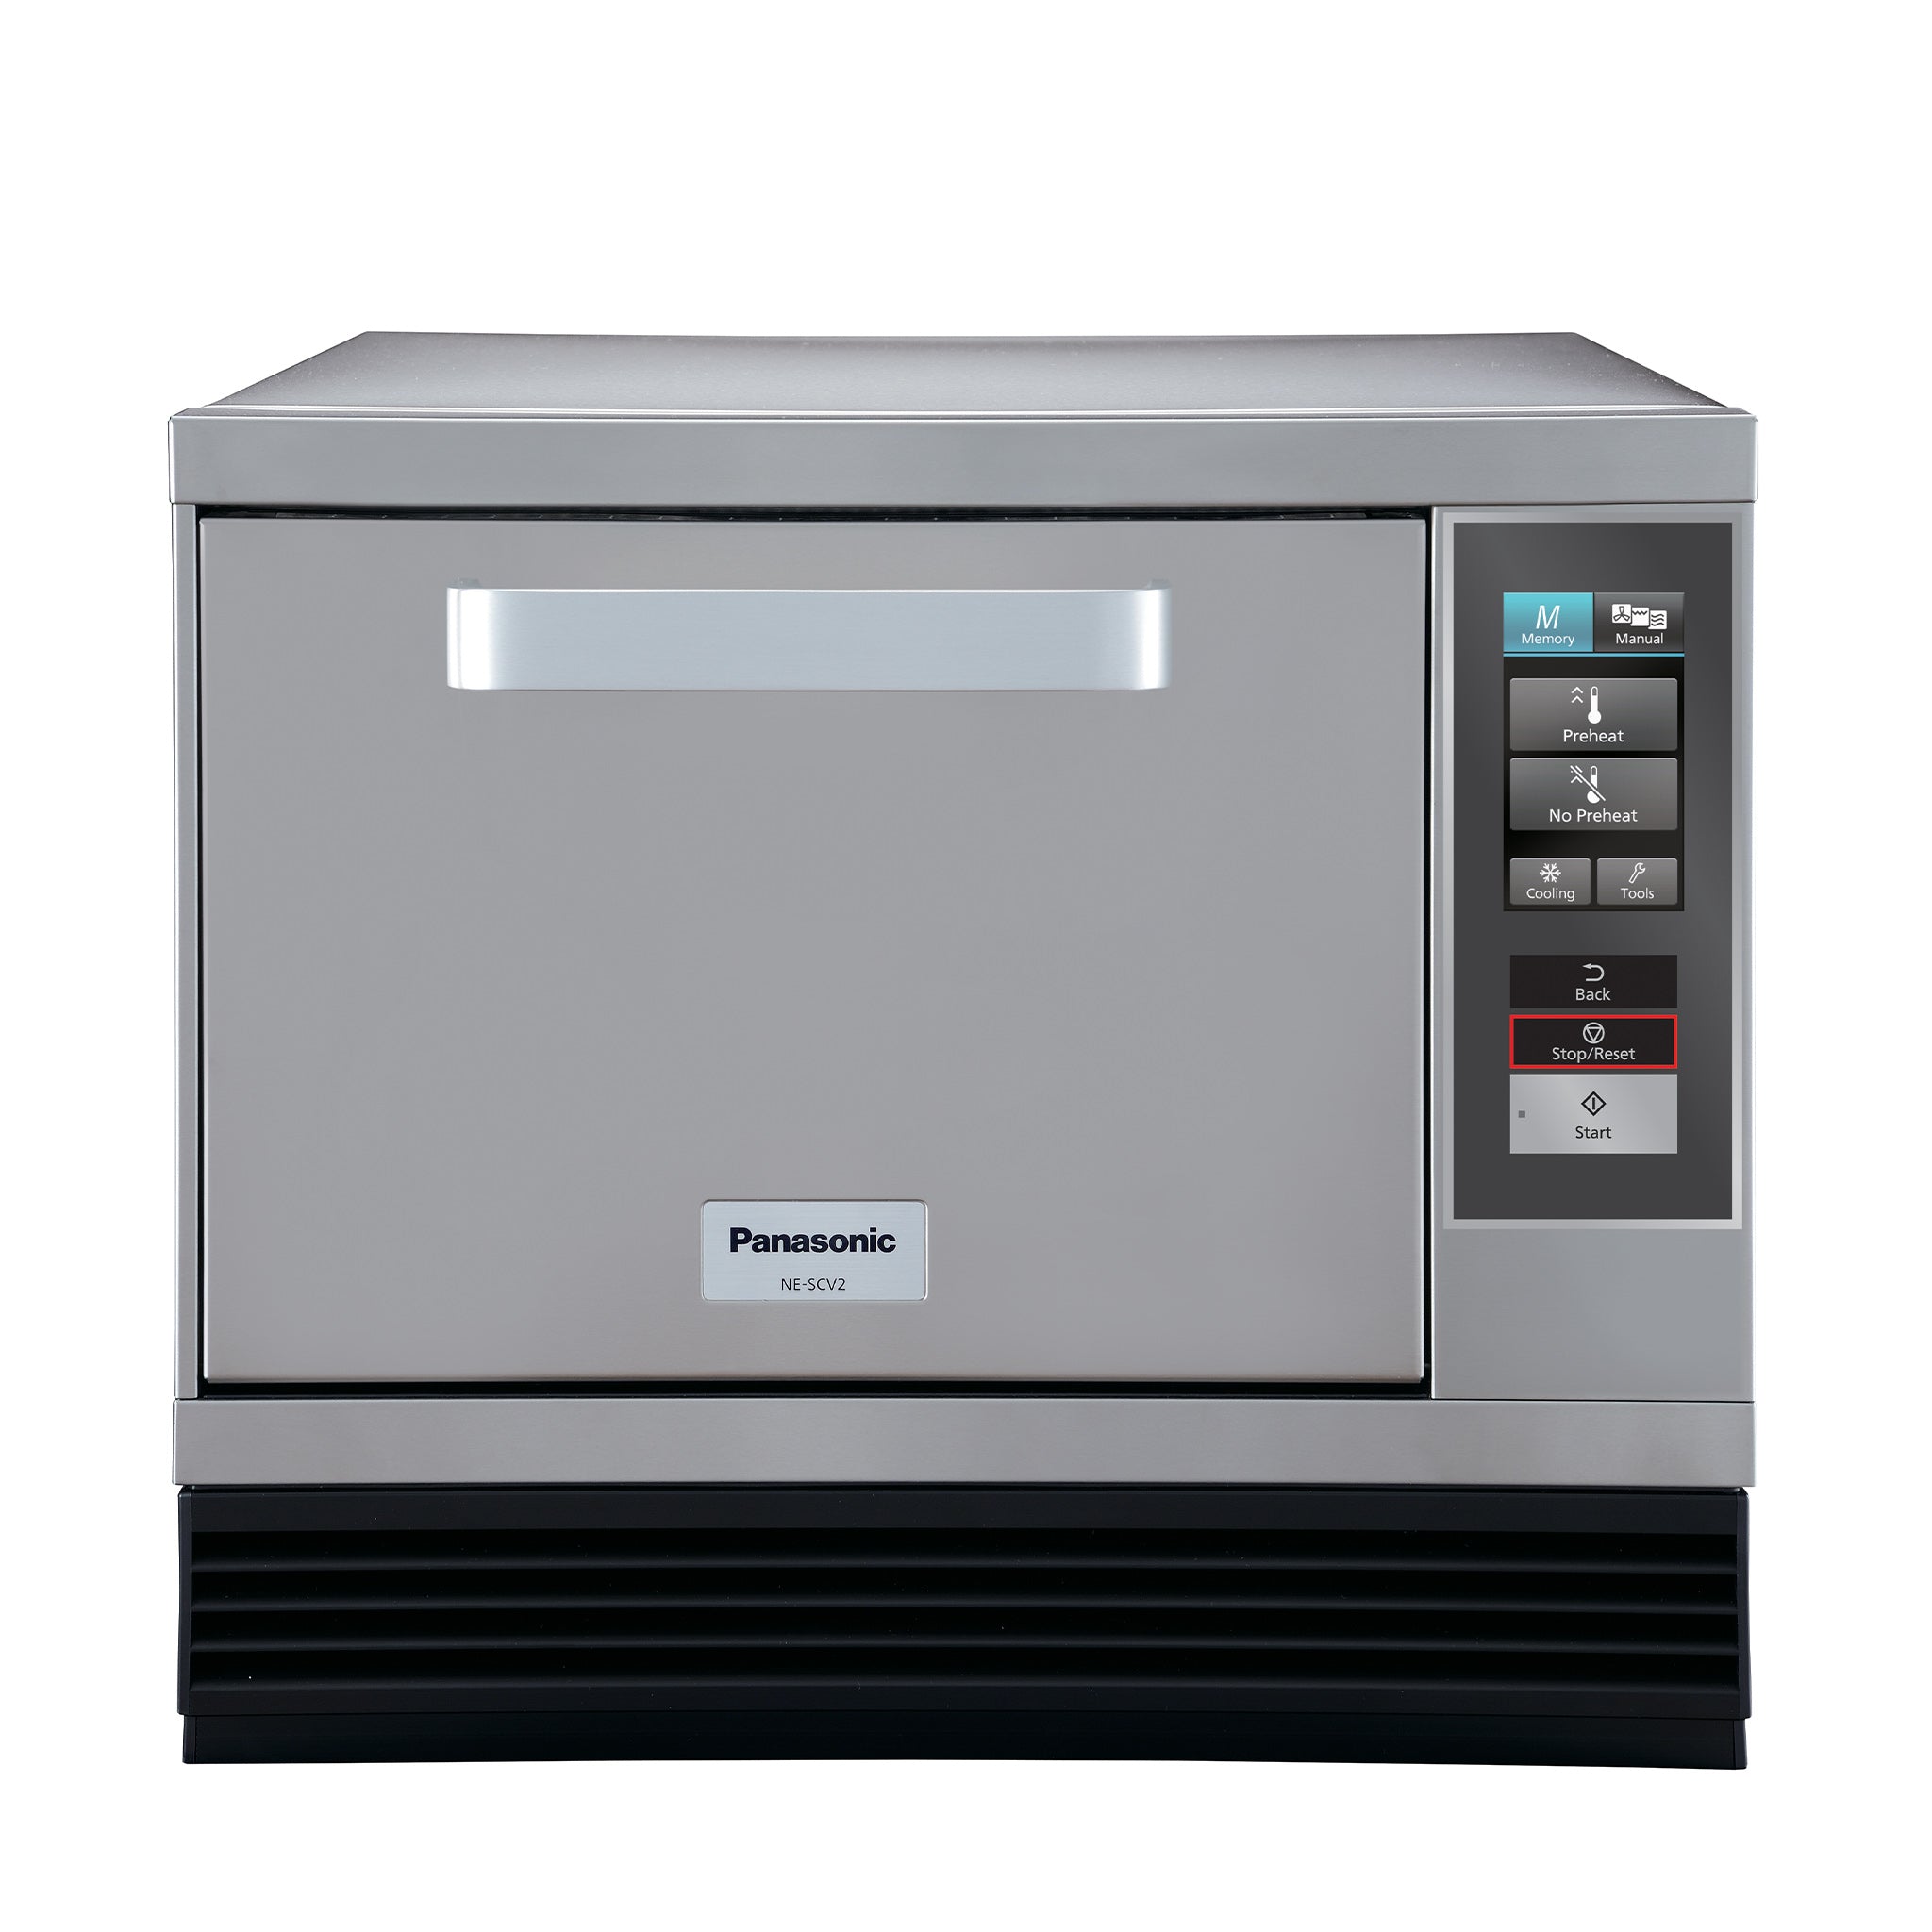 SonicChef High-Speed Convection Multi-Oven